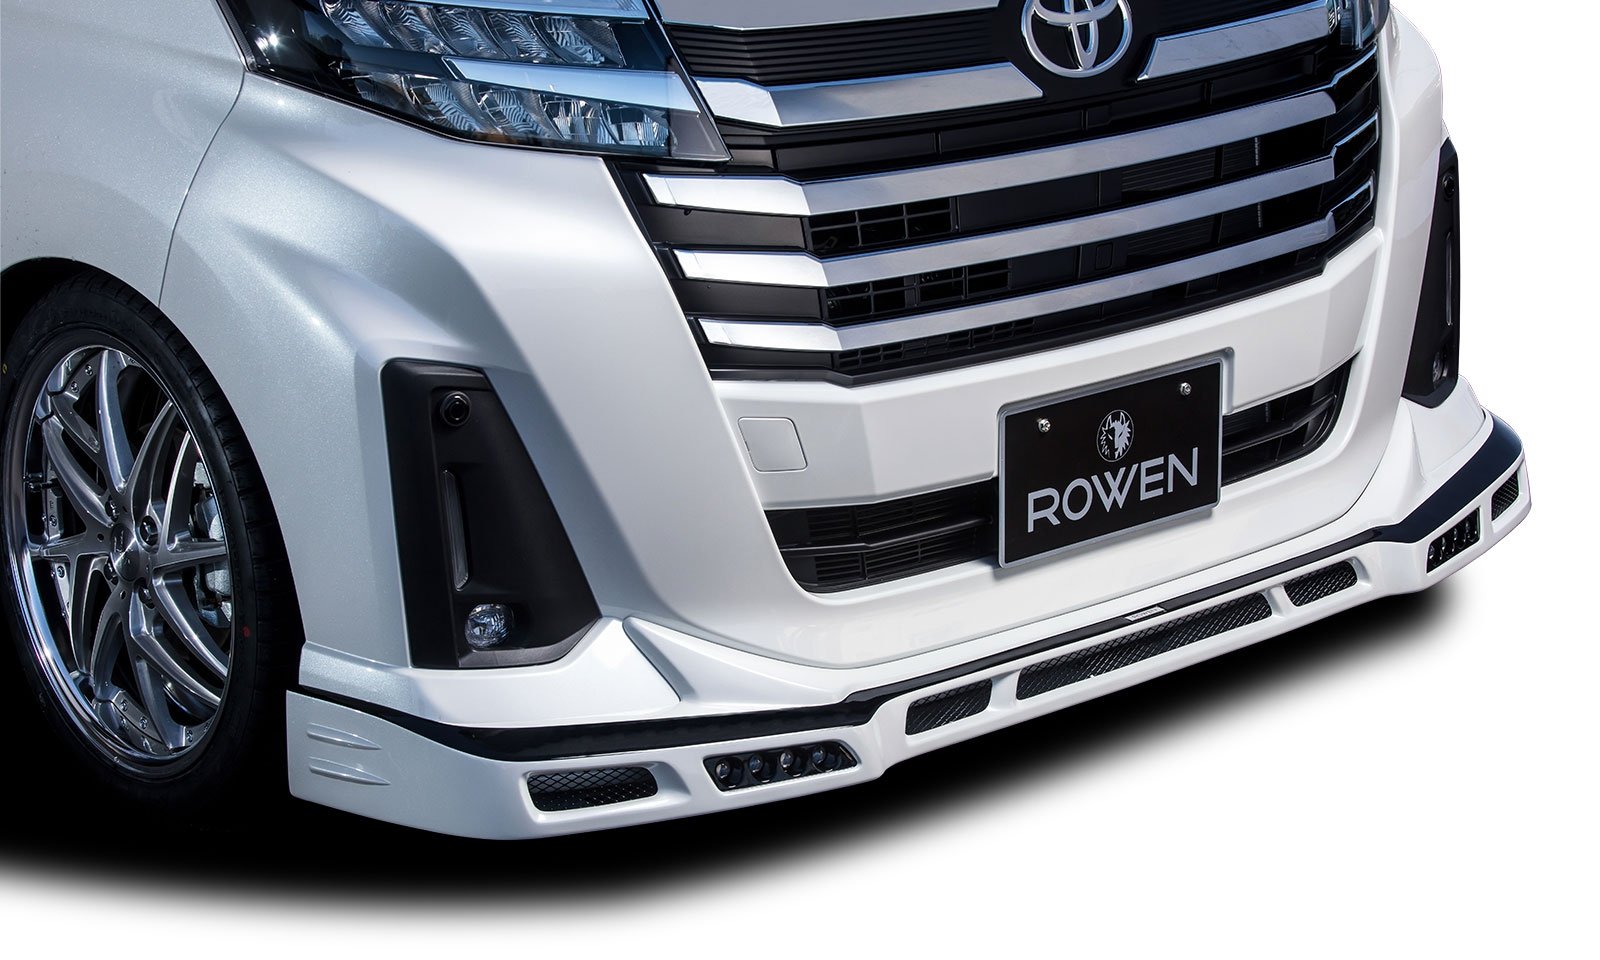 Check our price and buy Rowen body kit for Toyota Roomy Custom